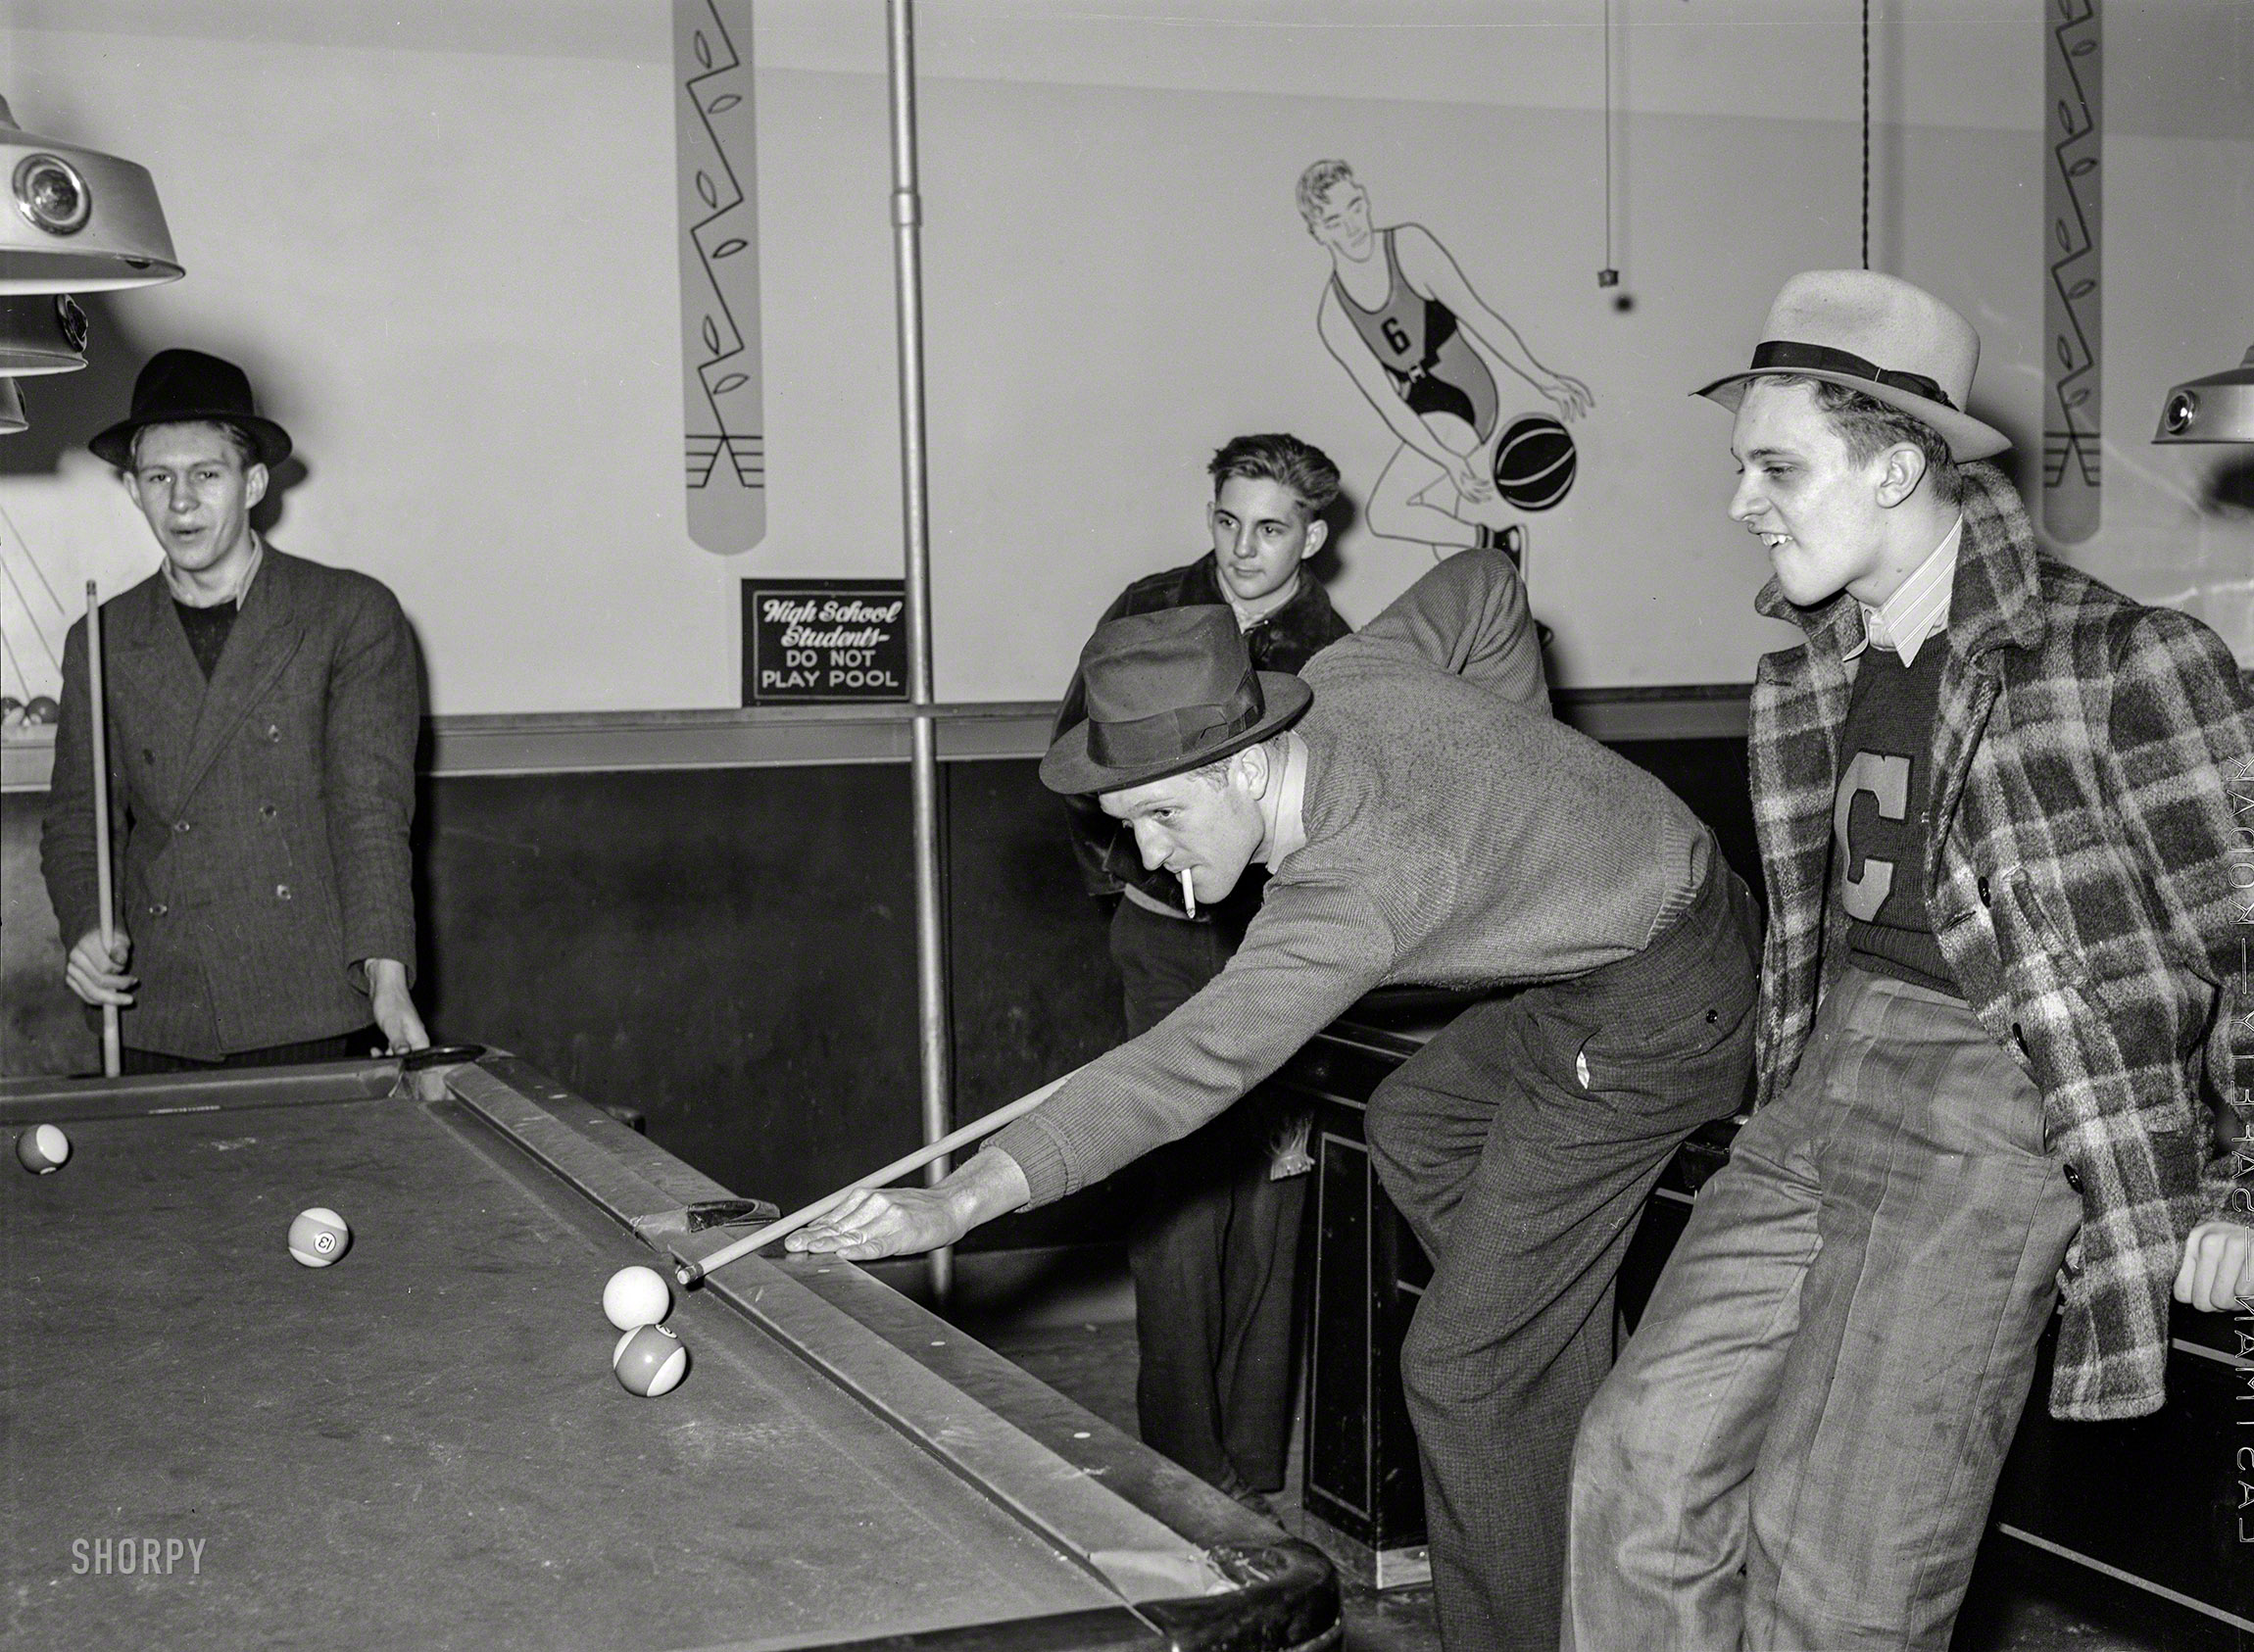 February 1940. "High school students playing pool. Clinton, Indiana." Photo by Arthur Rothstein for the Farm Security Administration. View full size.